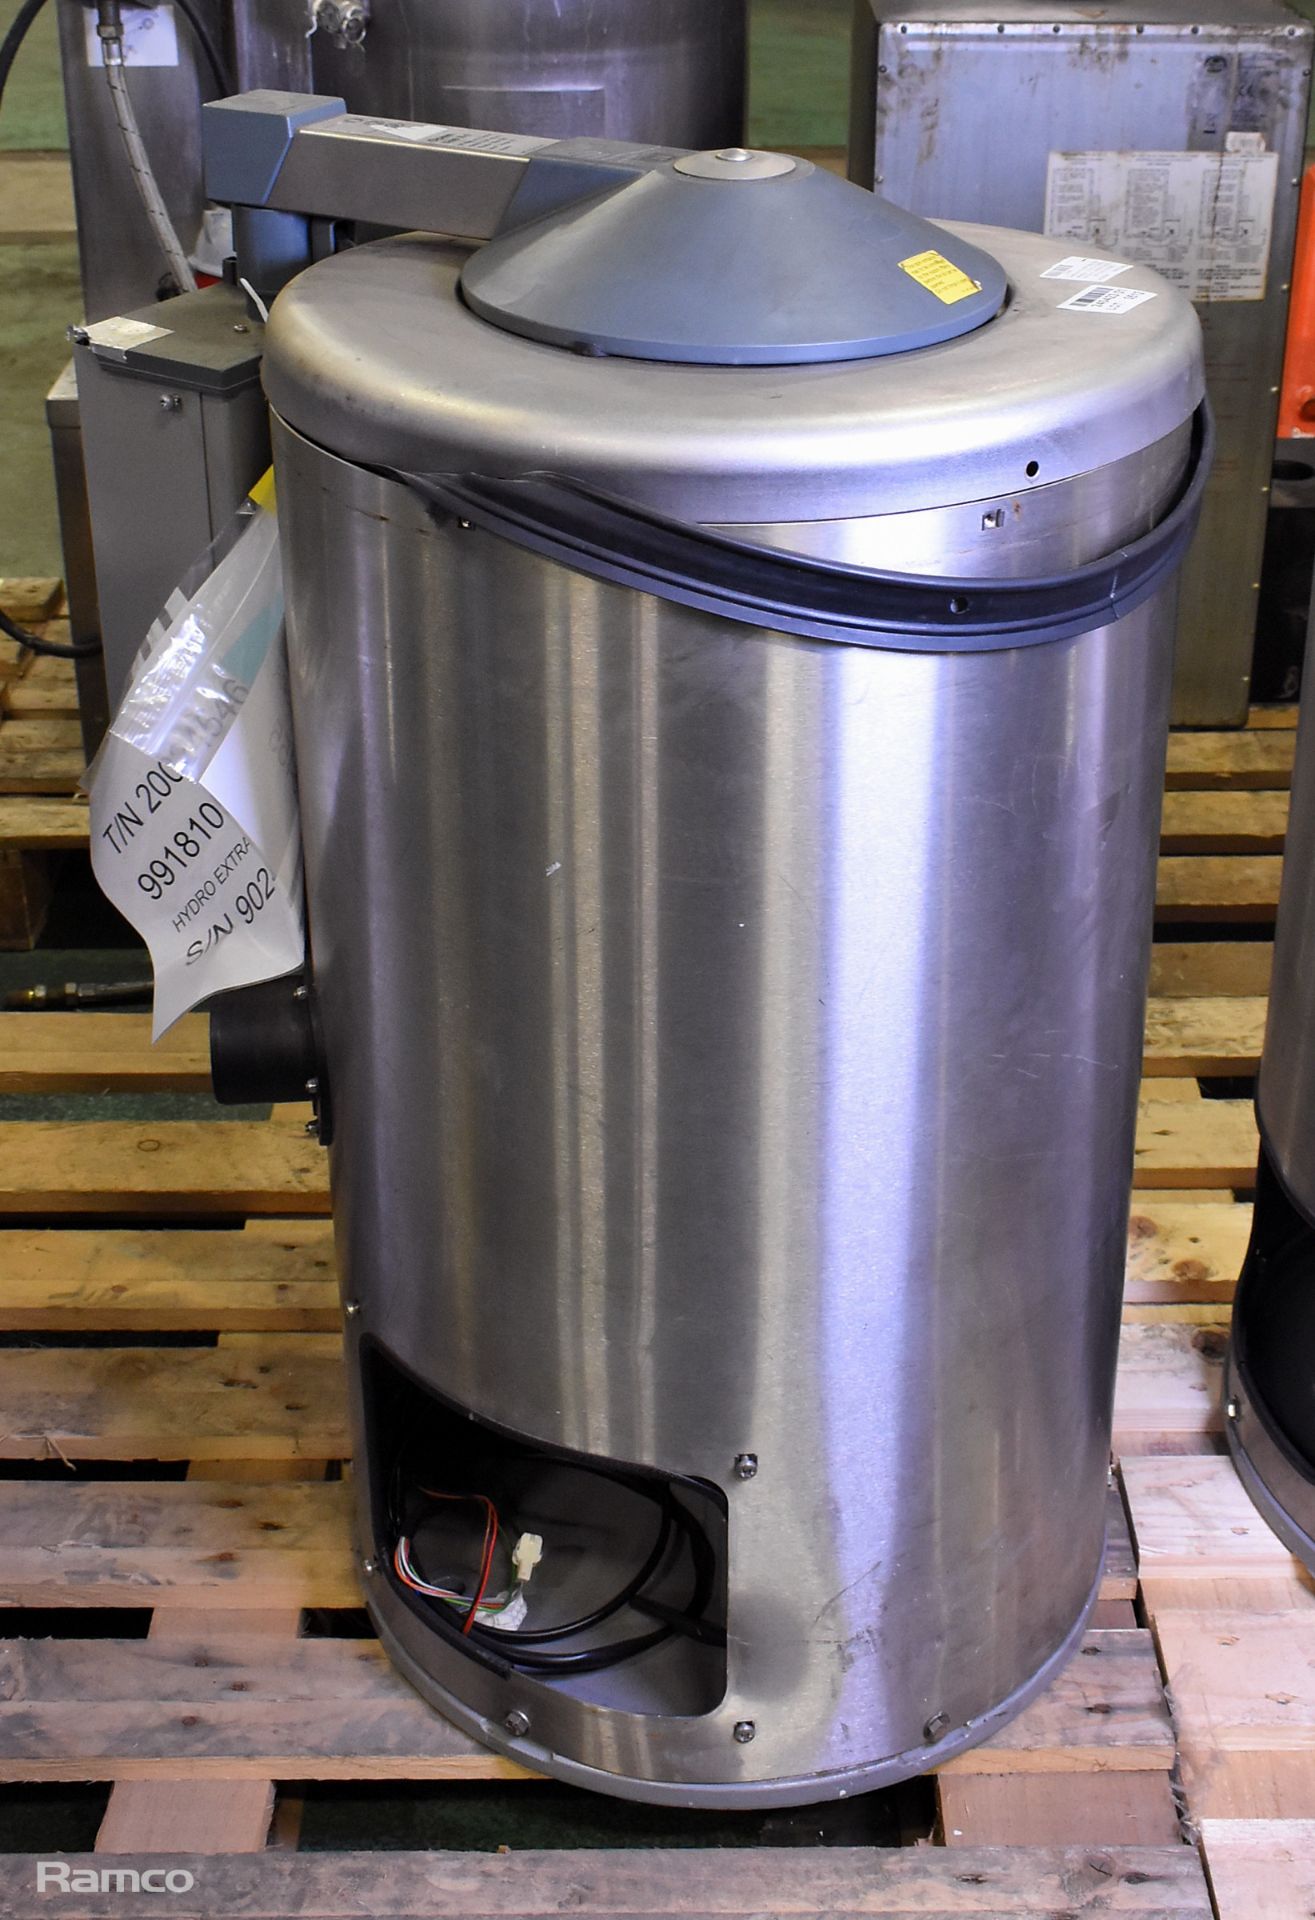 Electrolux C240R 8kg hydro extractor - W 515 x D 660 x H 910mm - MISSING BOTH BOTTOM COVERS - Image 4 of 9